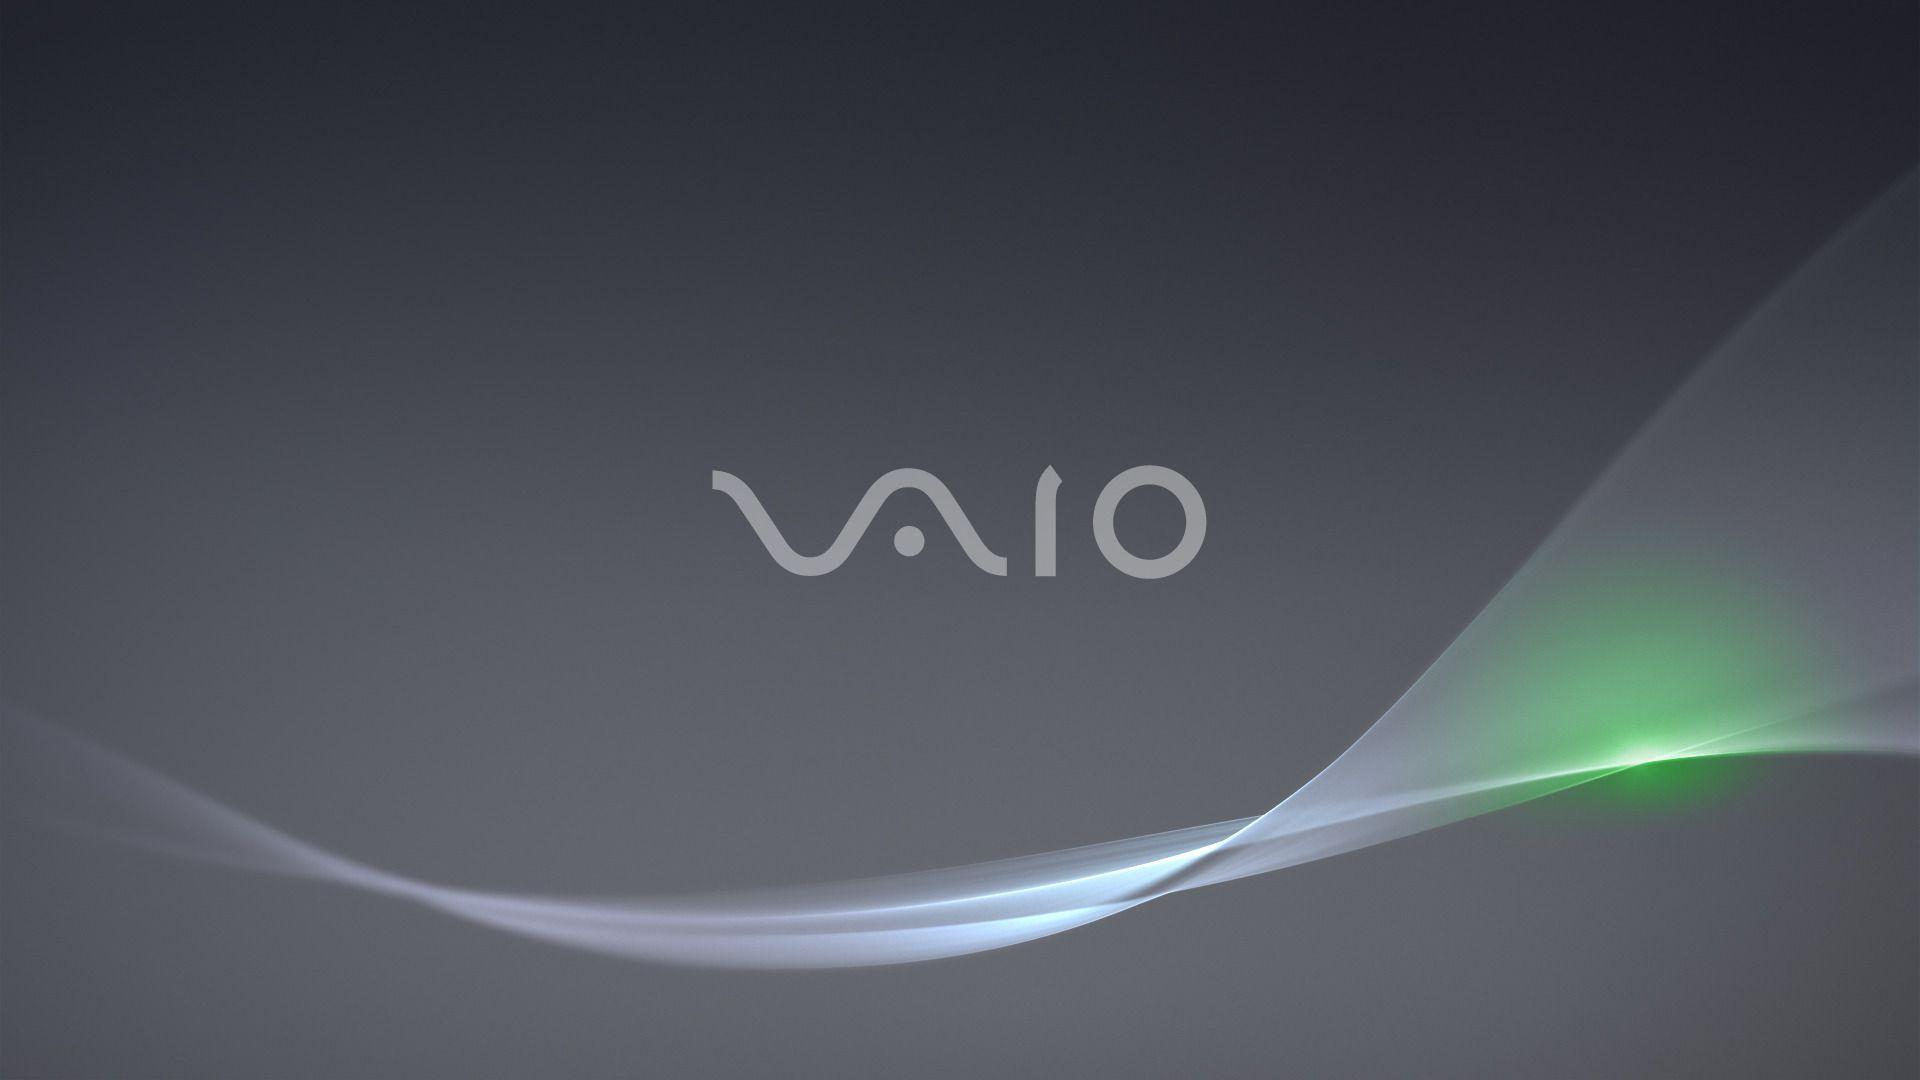 Sony vaio wallpapers hd